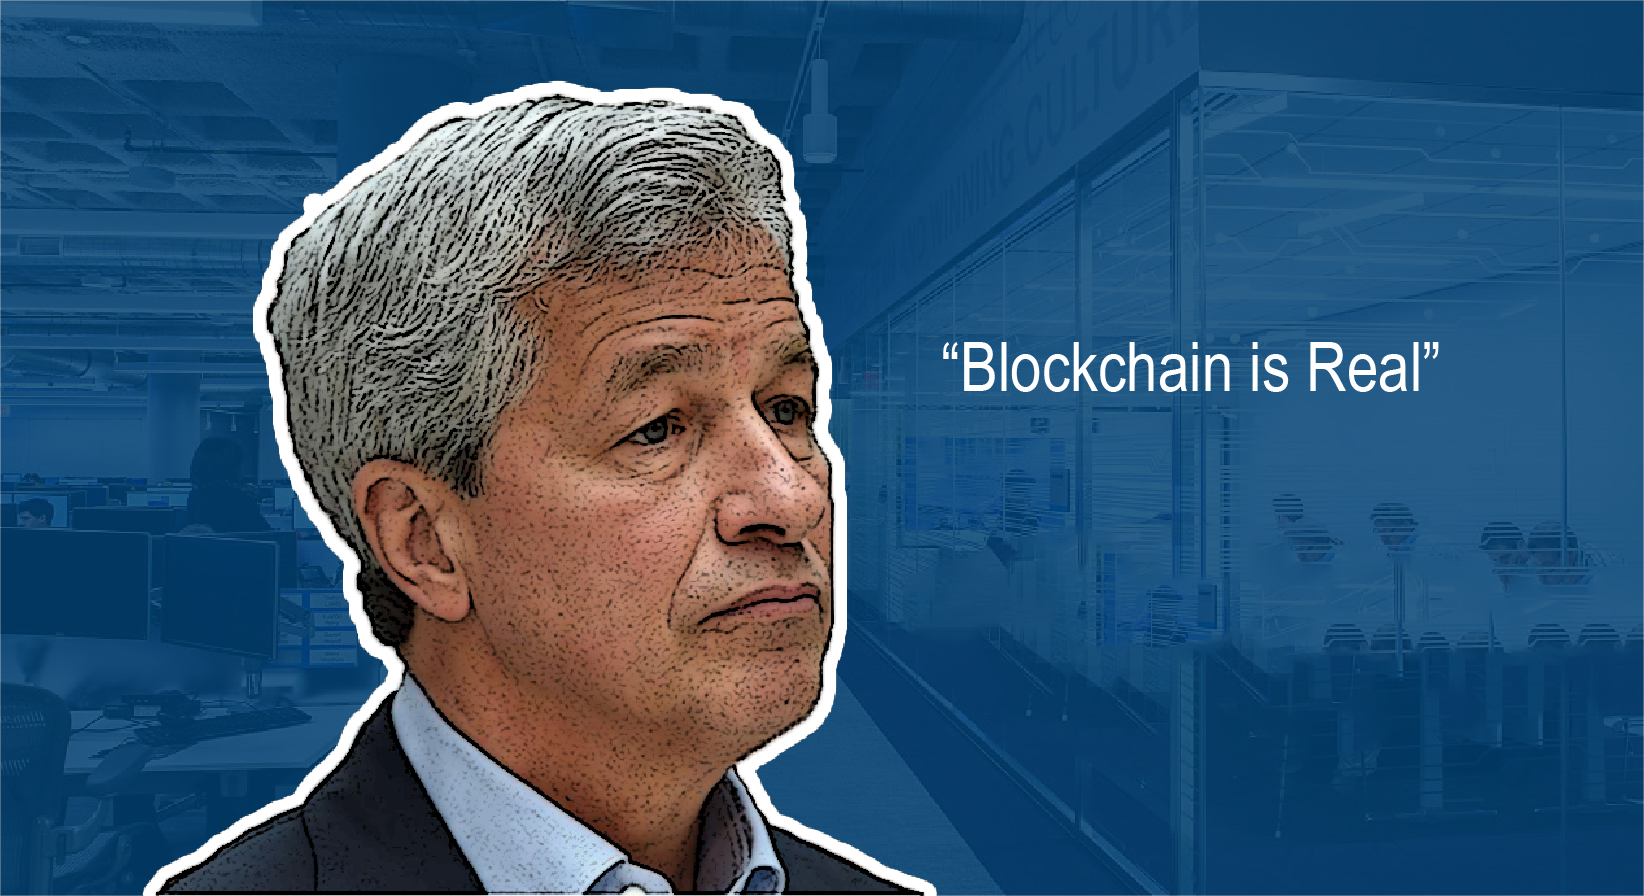 Blockchain is Real says Jamie Dimon, Chairman and CEO, JP Morgan Chase